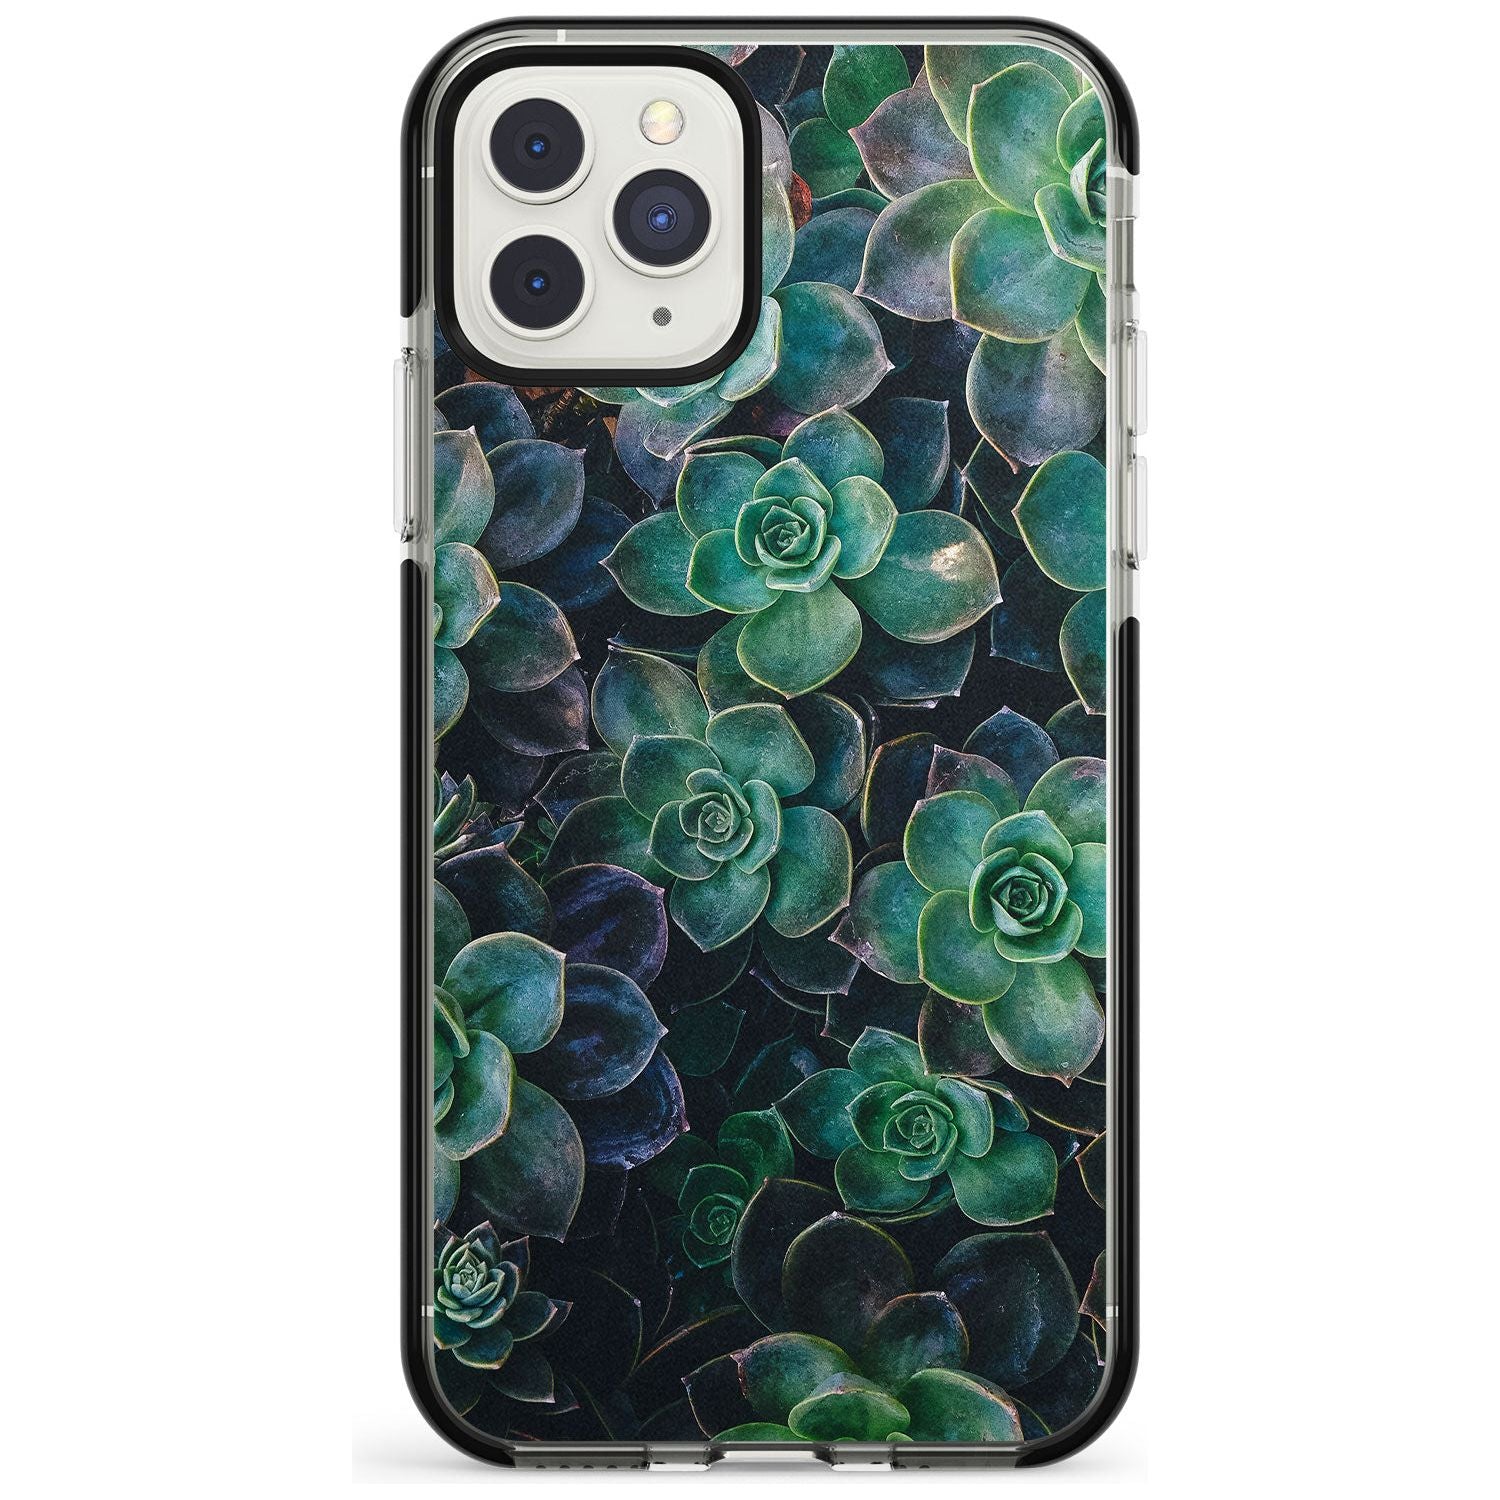 Succulents - Real Botanical Photographs Black Impact Phone Case for iPhone 11 Pro Max